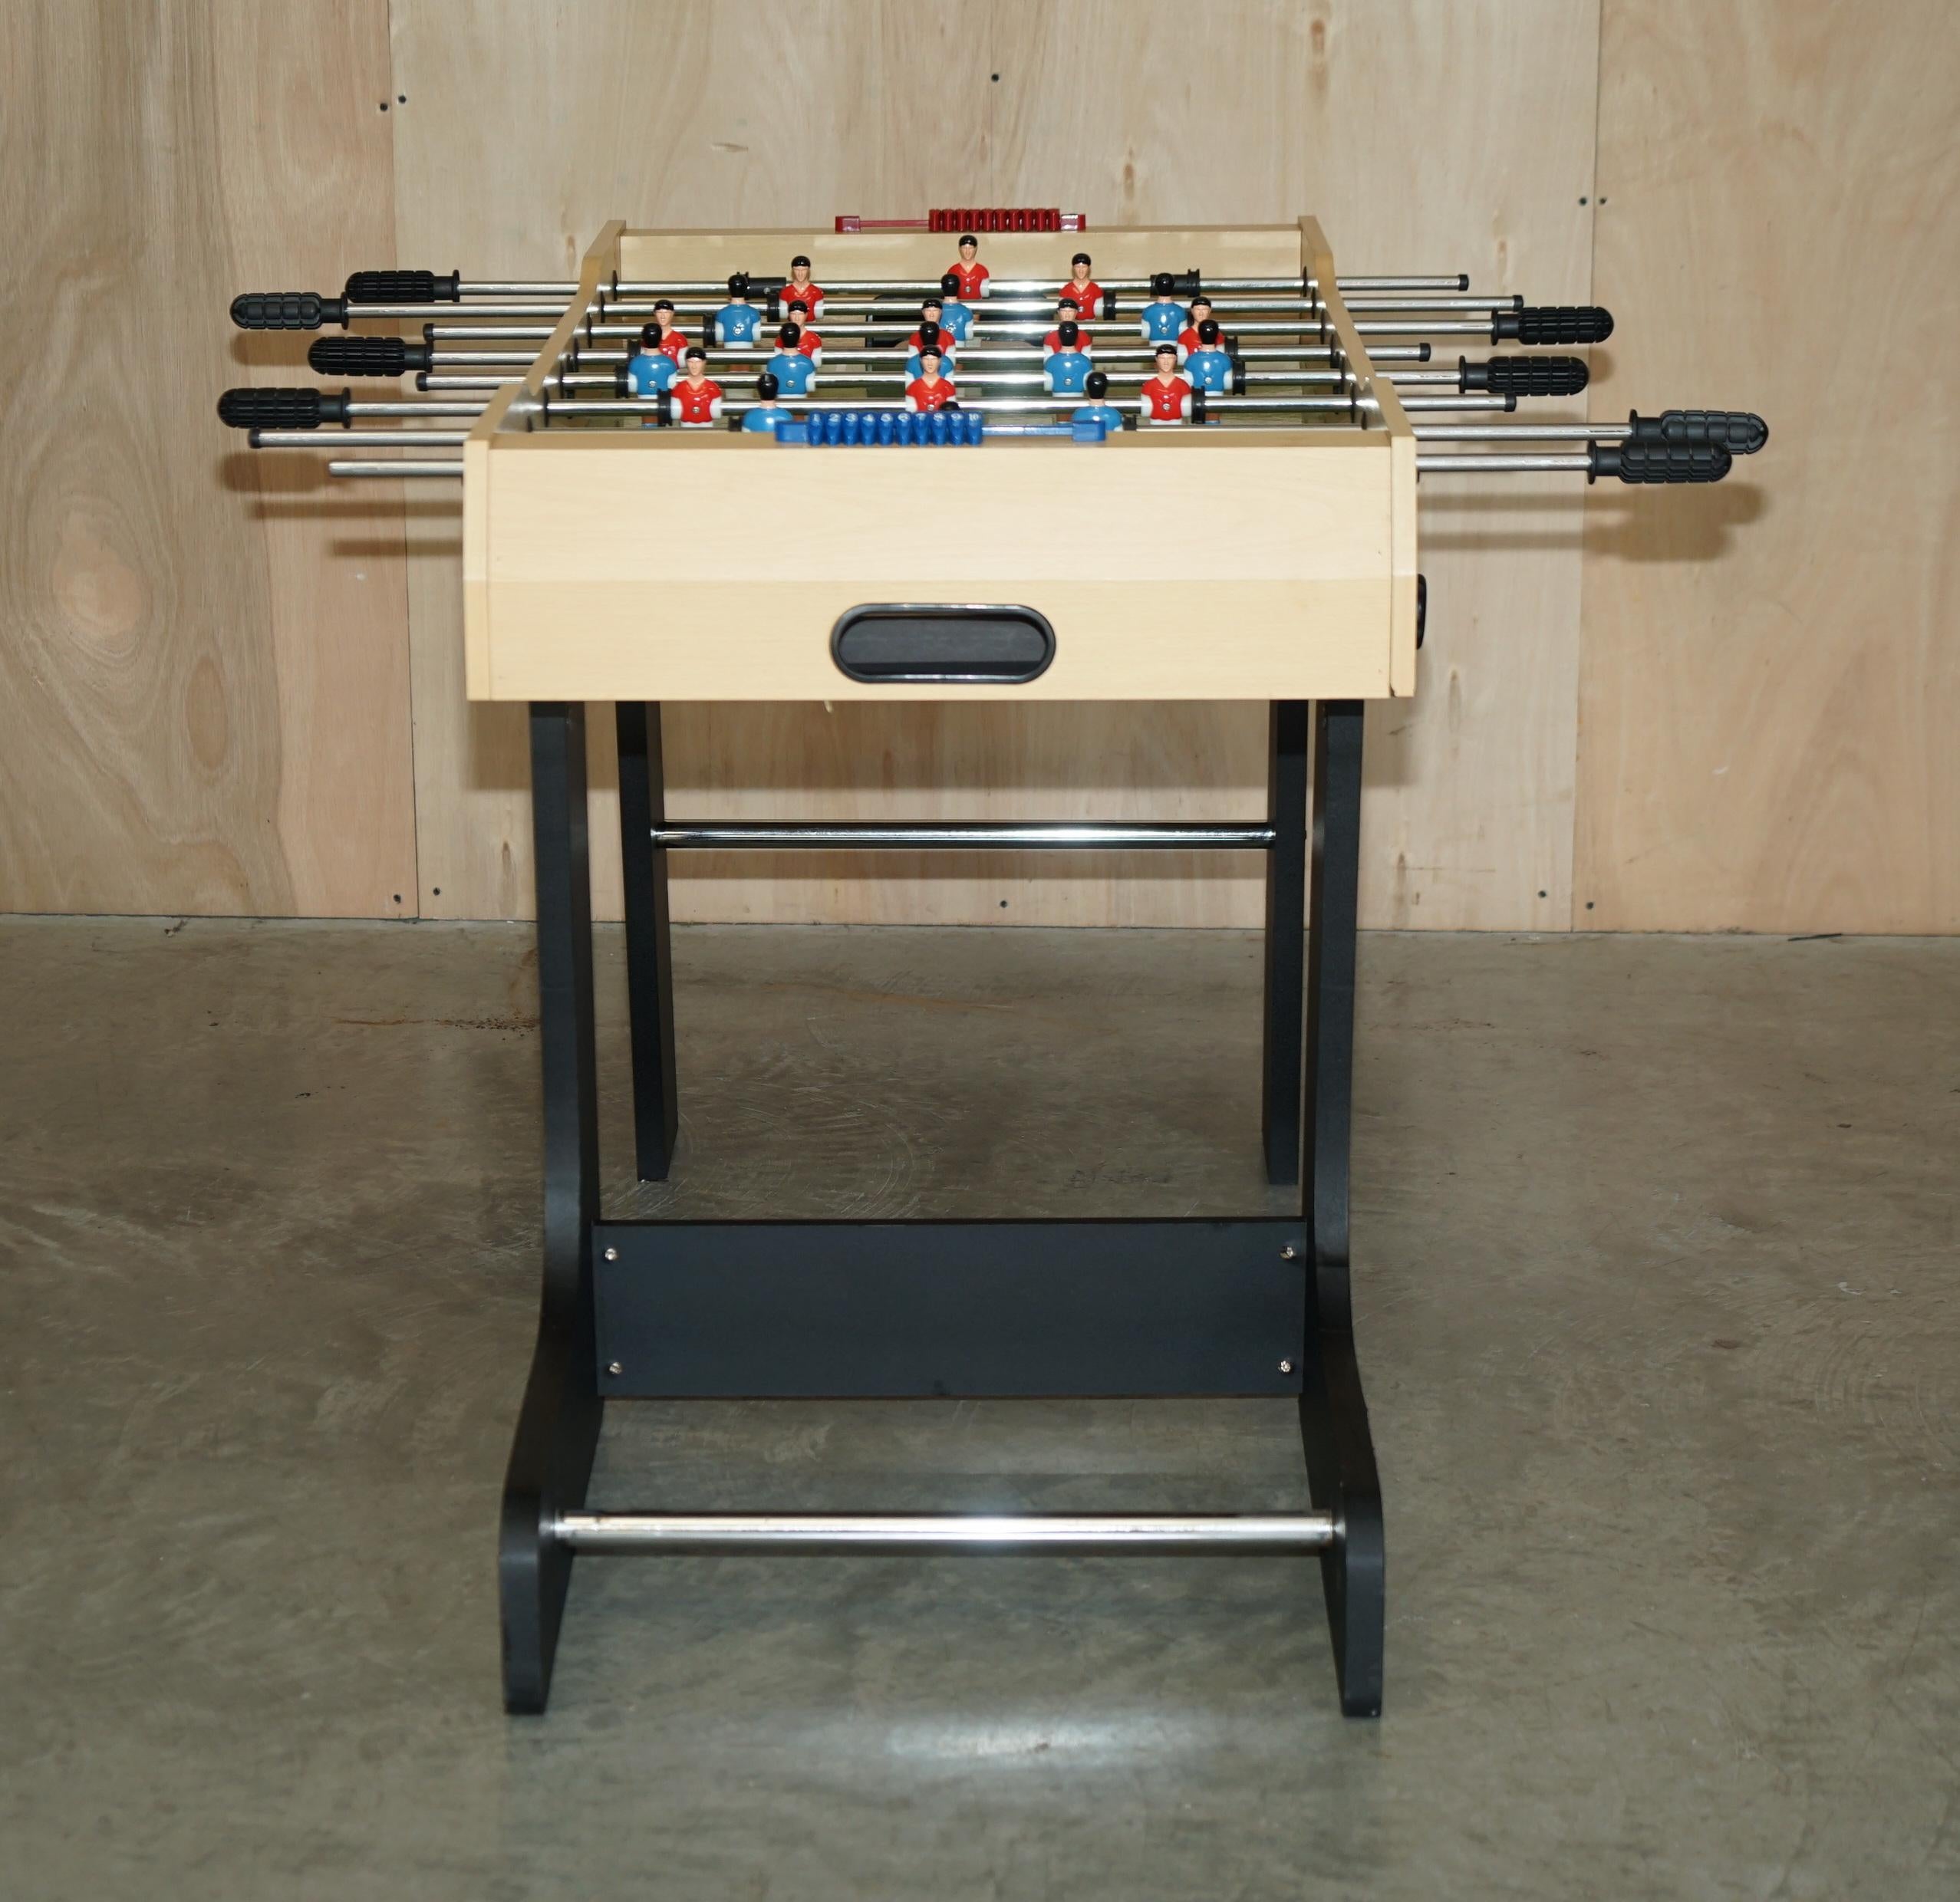 Table Football / Foosball That Folds Away for Ease of Storage Keep the Kids Busy 8